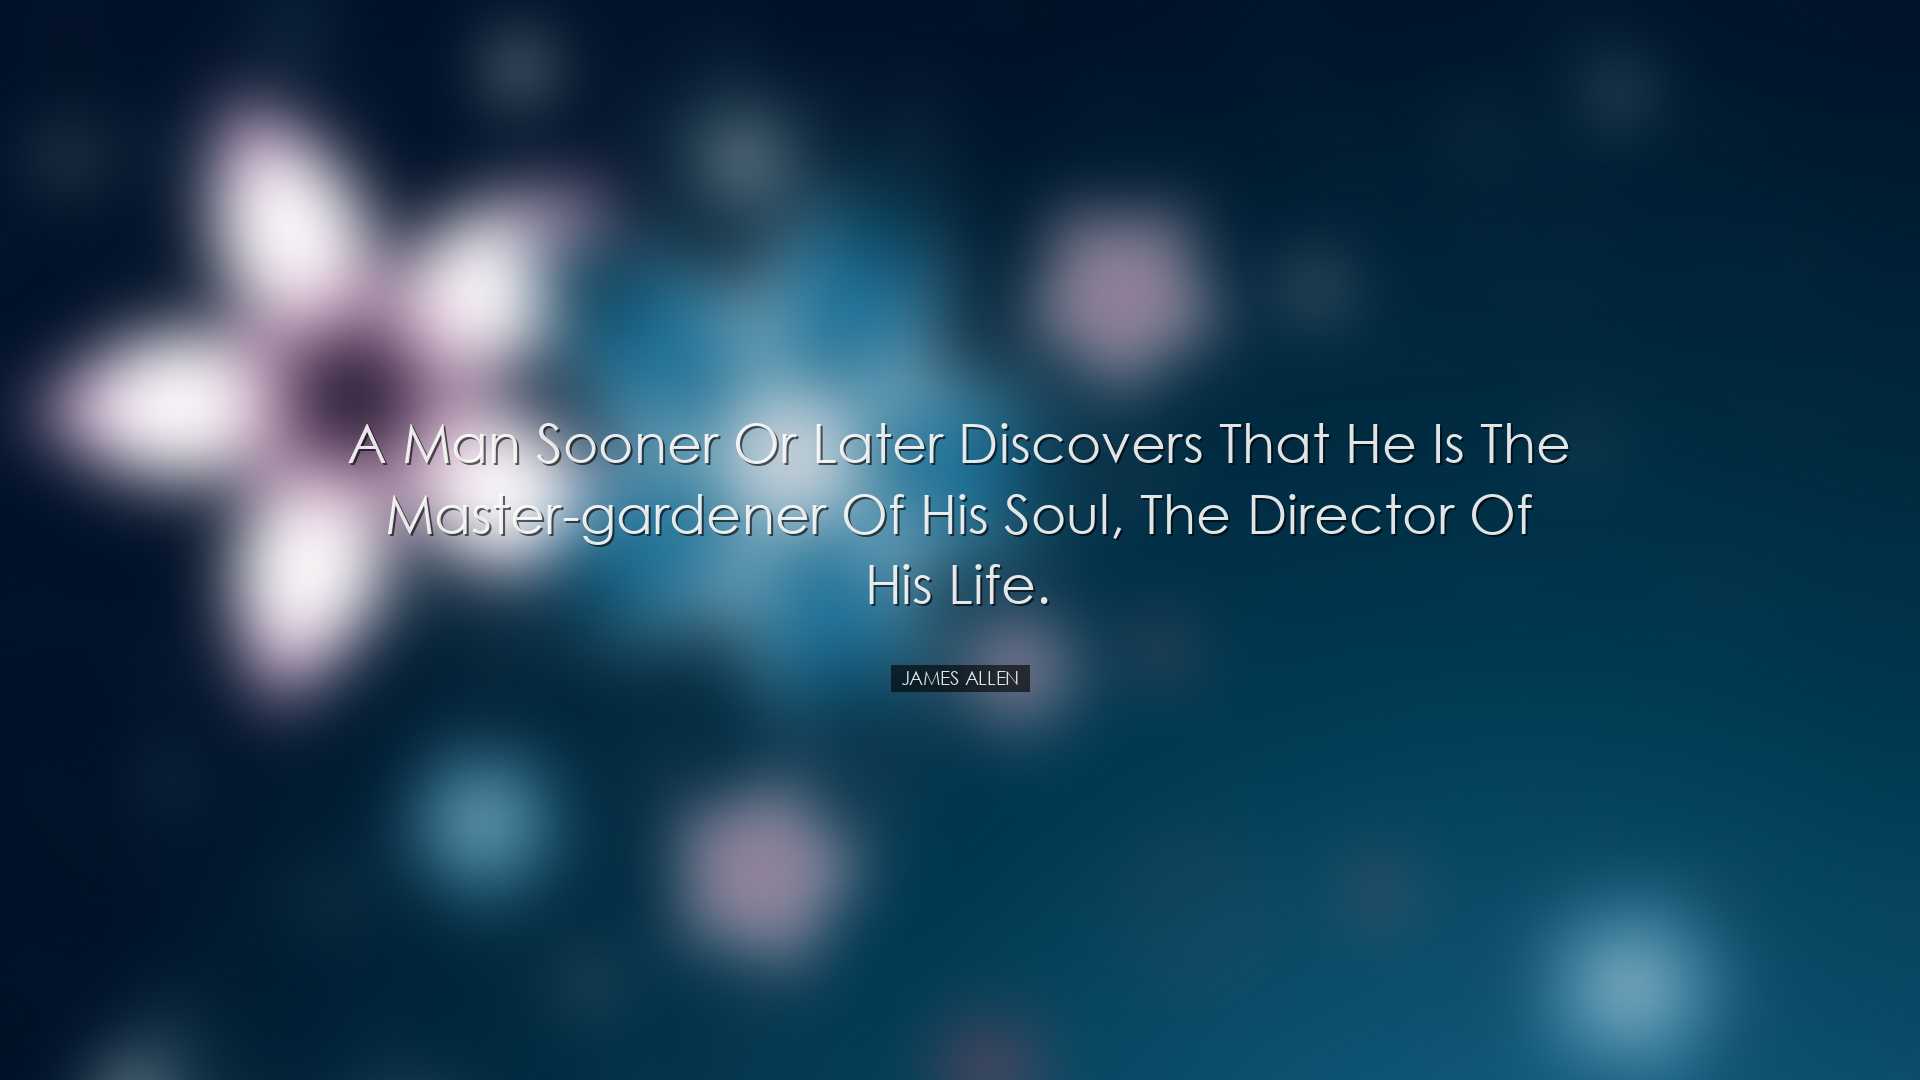 A man sooner or later discovers that he is the master-gardener of